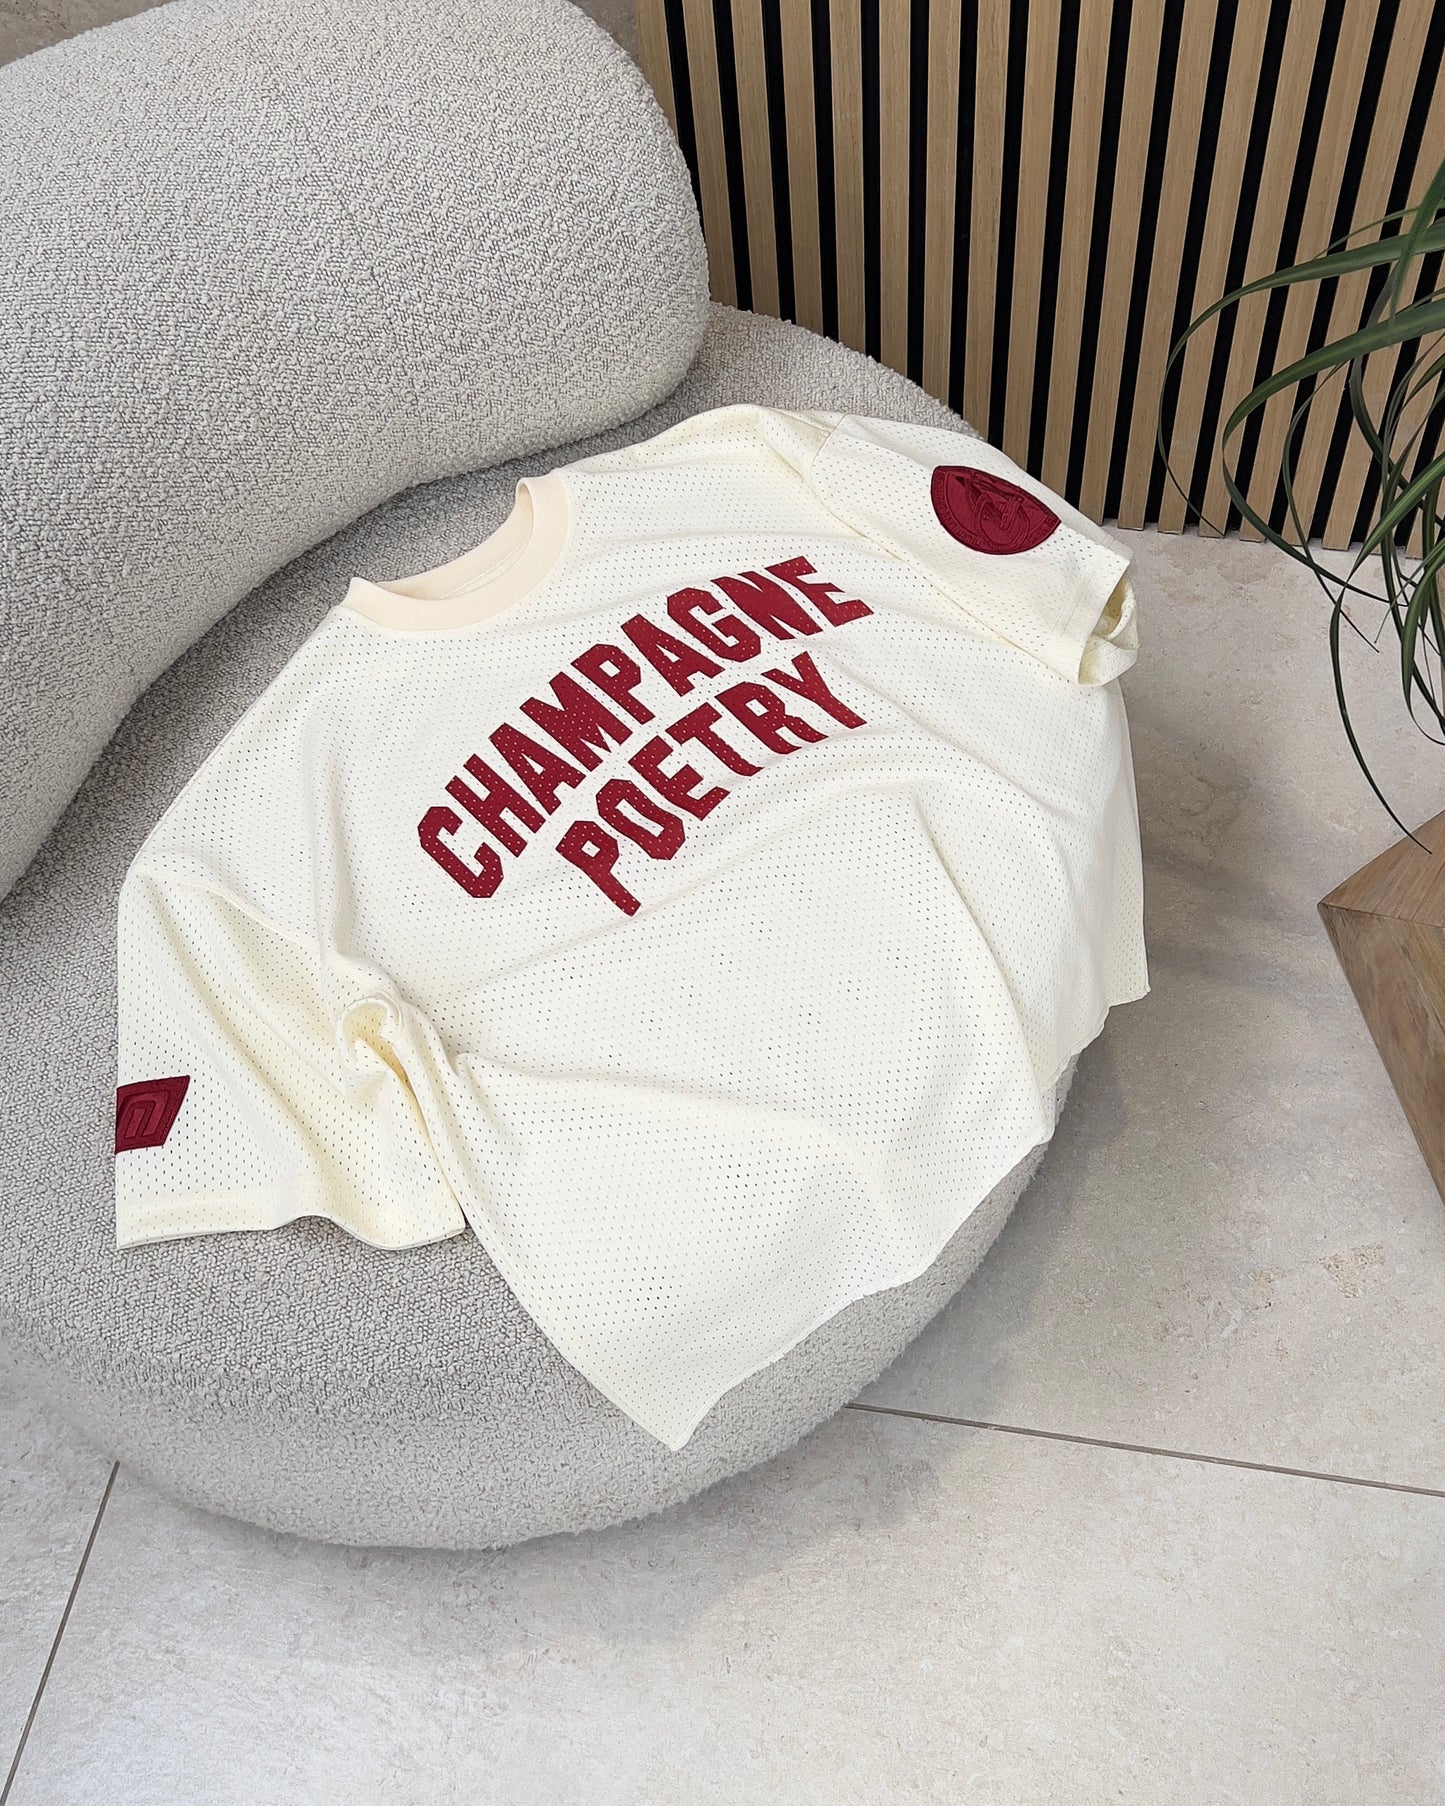 Reaven Champagne Poetry Jersey